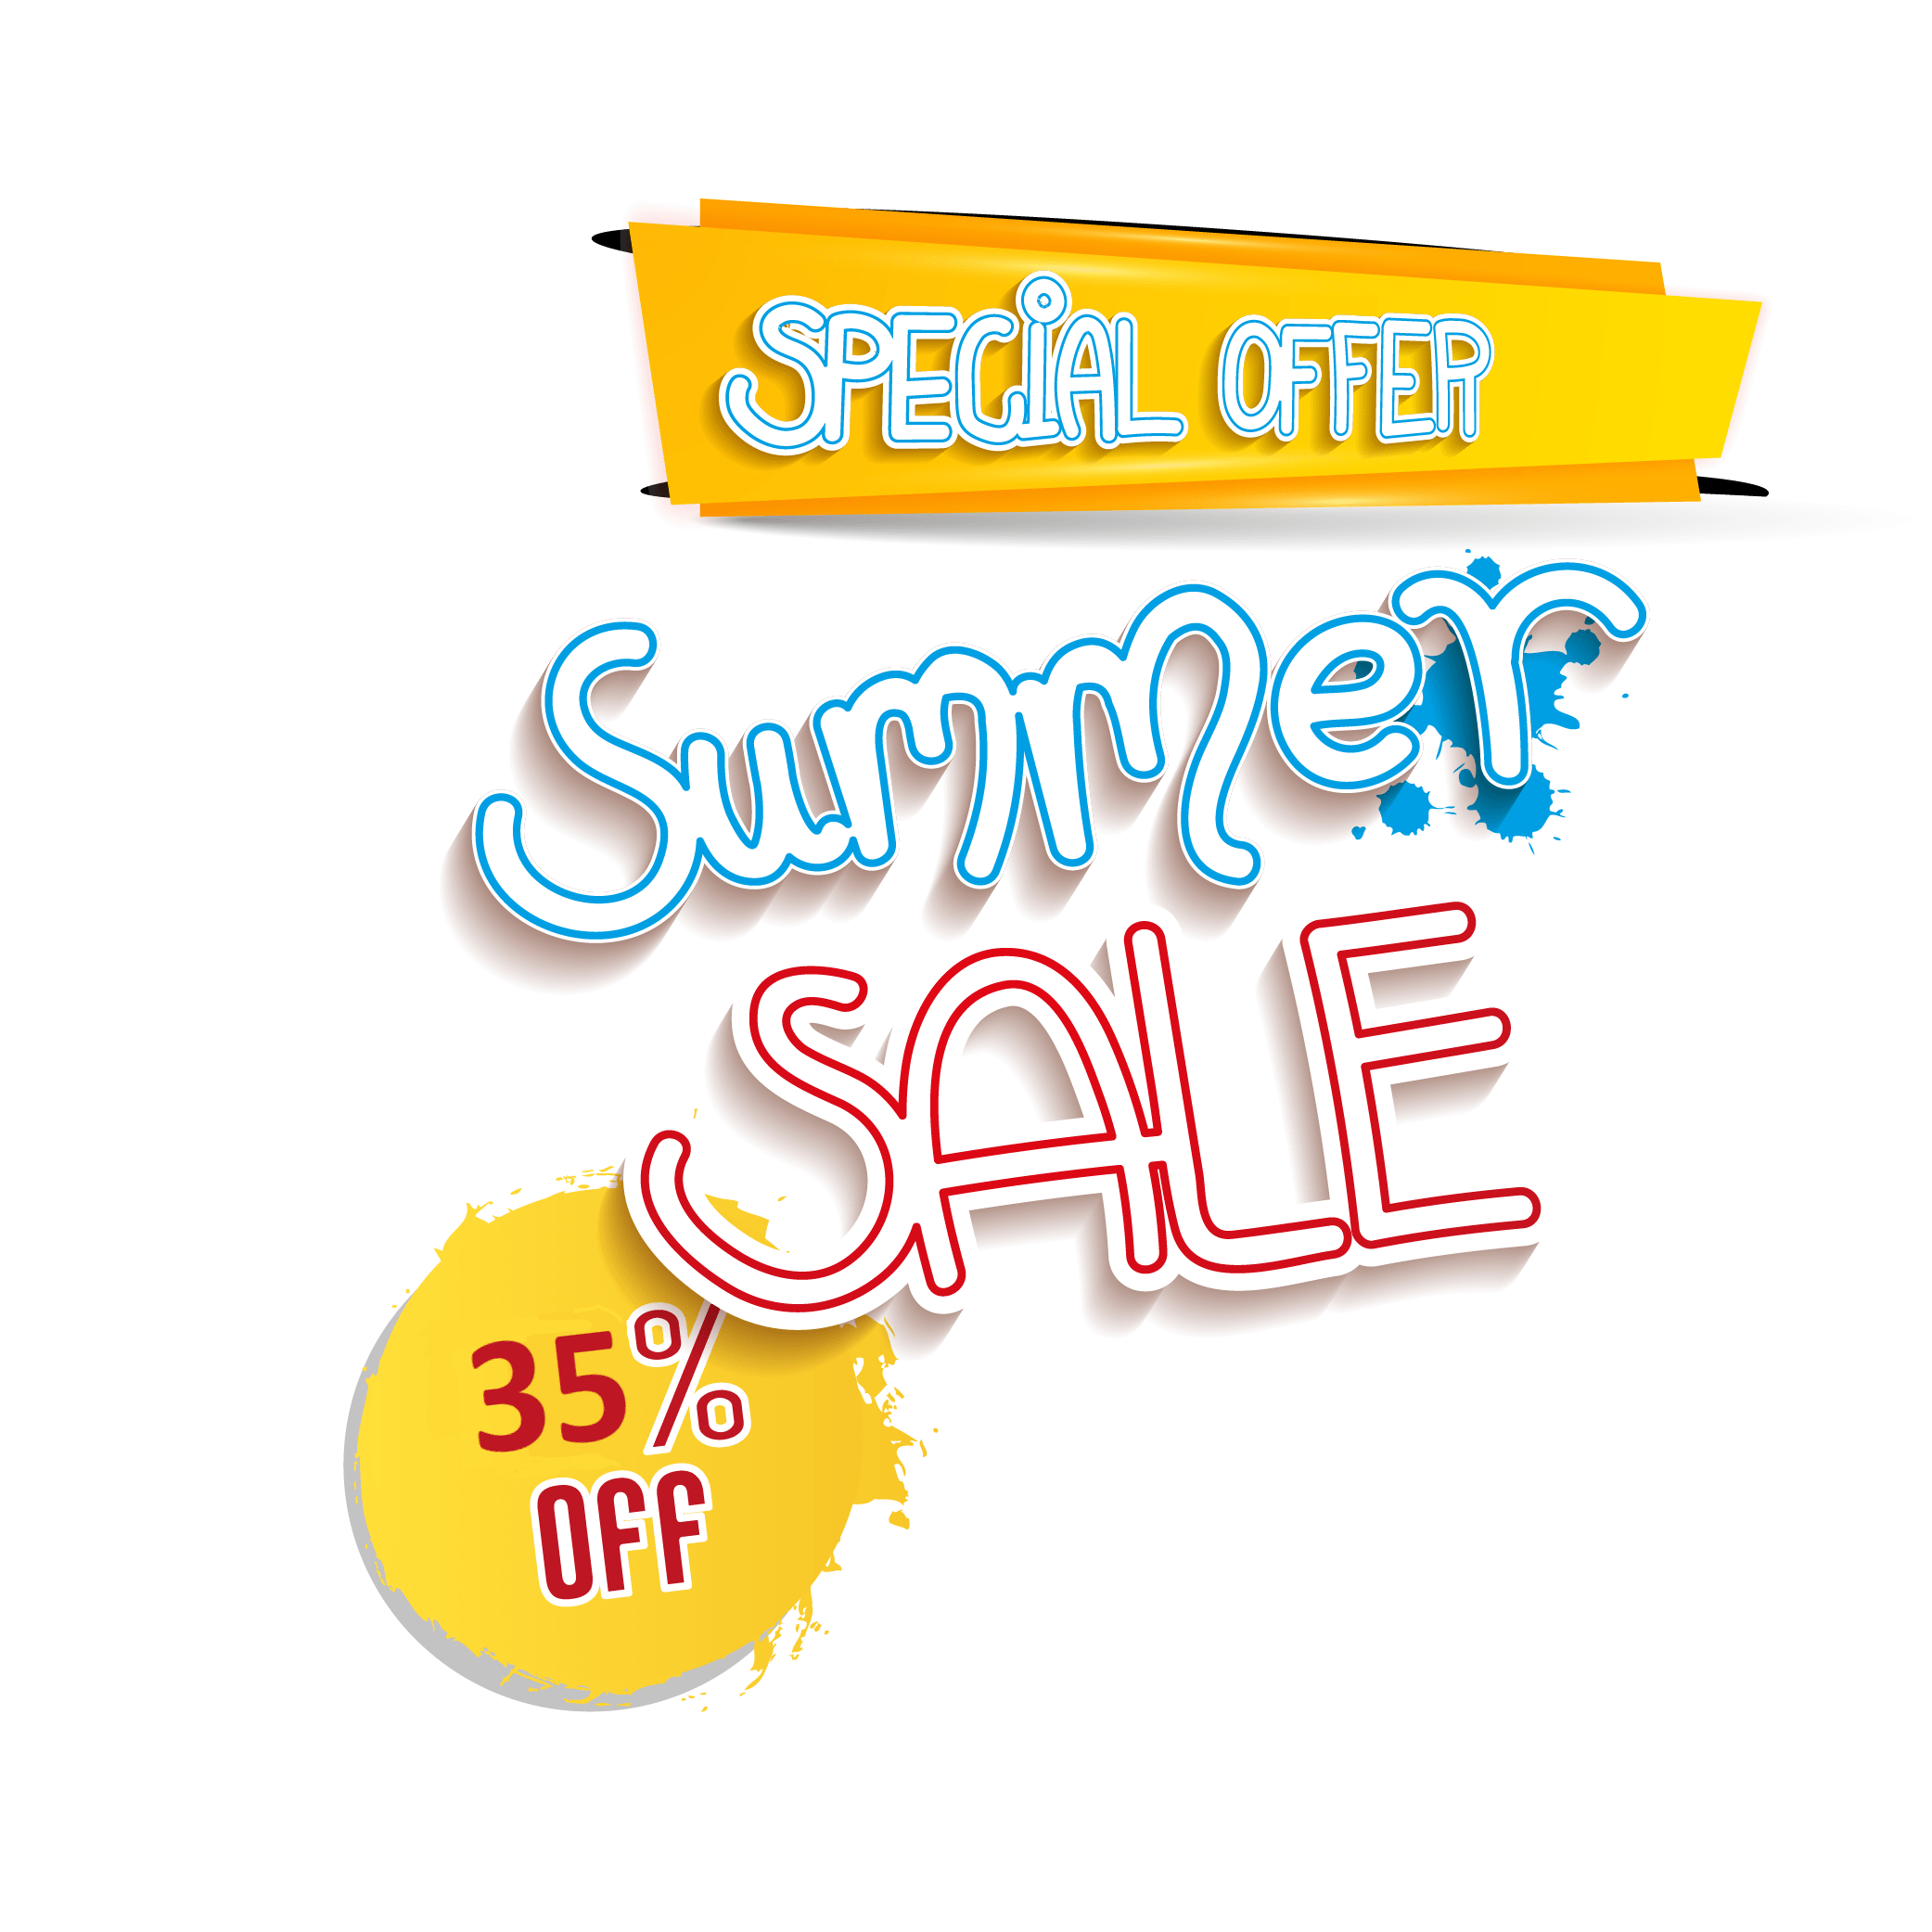 The summertime is coming soon and bringing Great Summer Discounts!